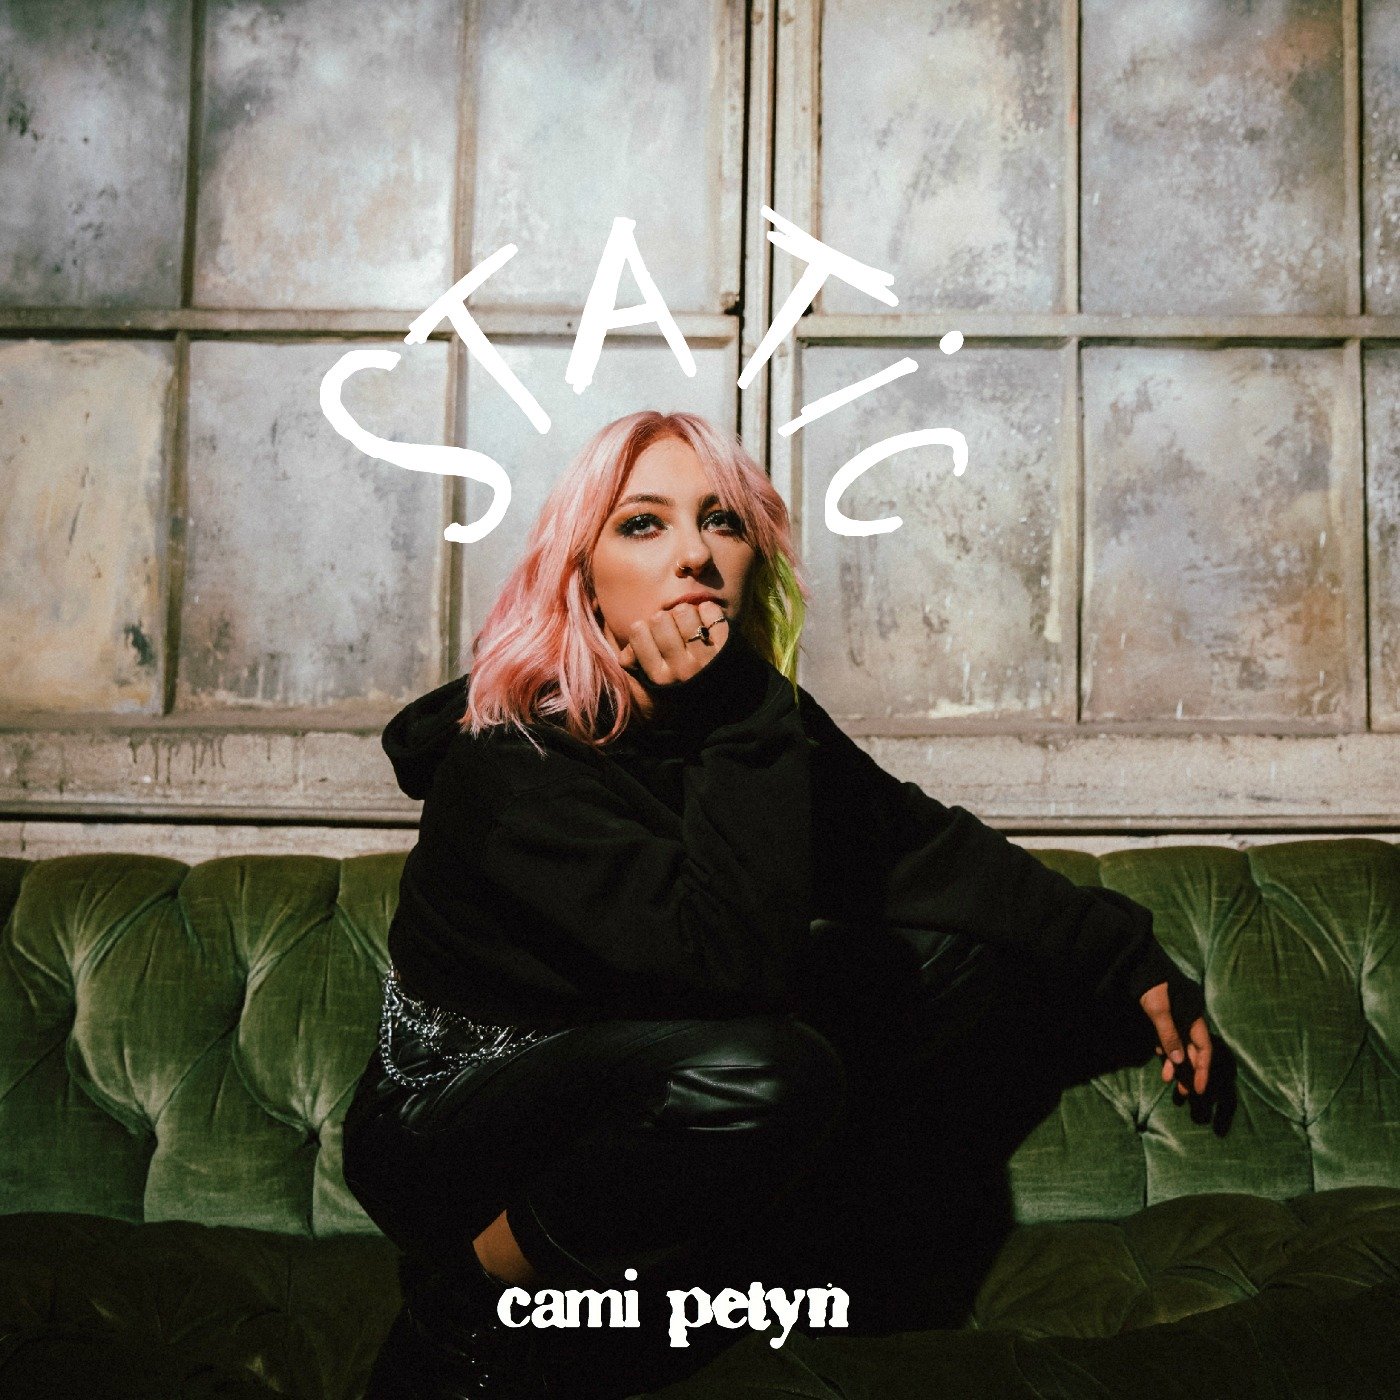 Your EDM Premiere and Q&A: Supreme Banana Puts out Supreme Hit – Get to Know Cami Petyn and 'Static' [Video] | Your EDM